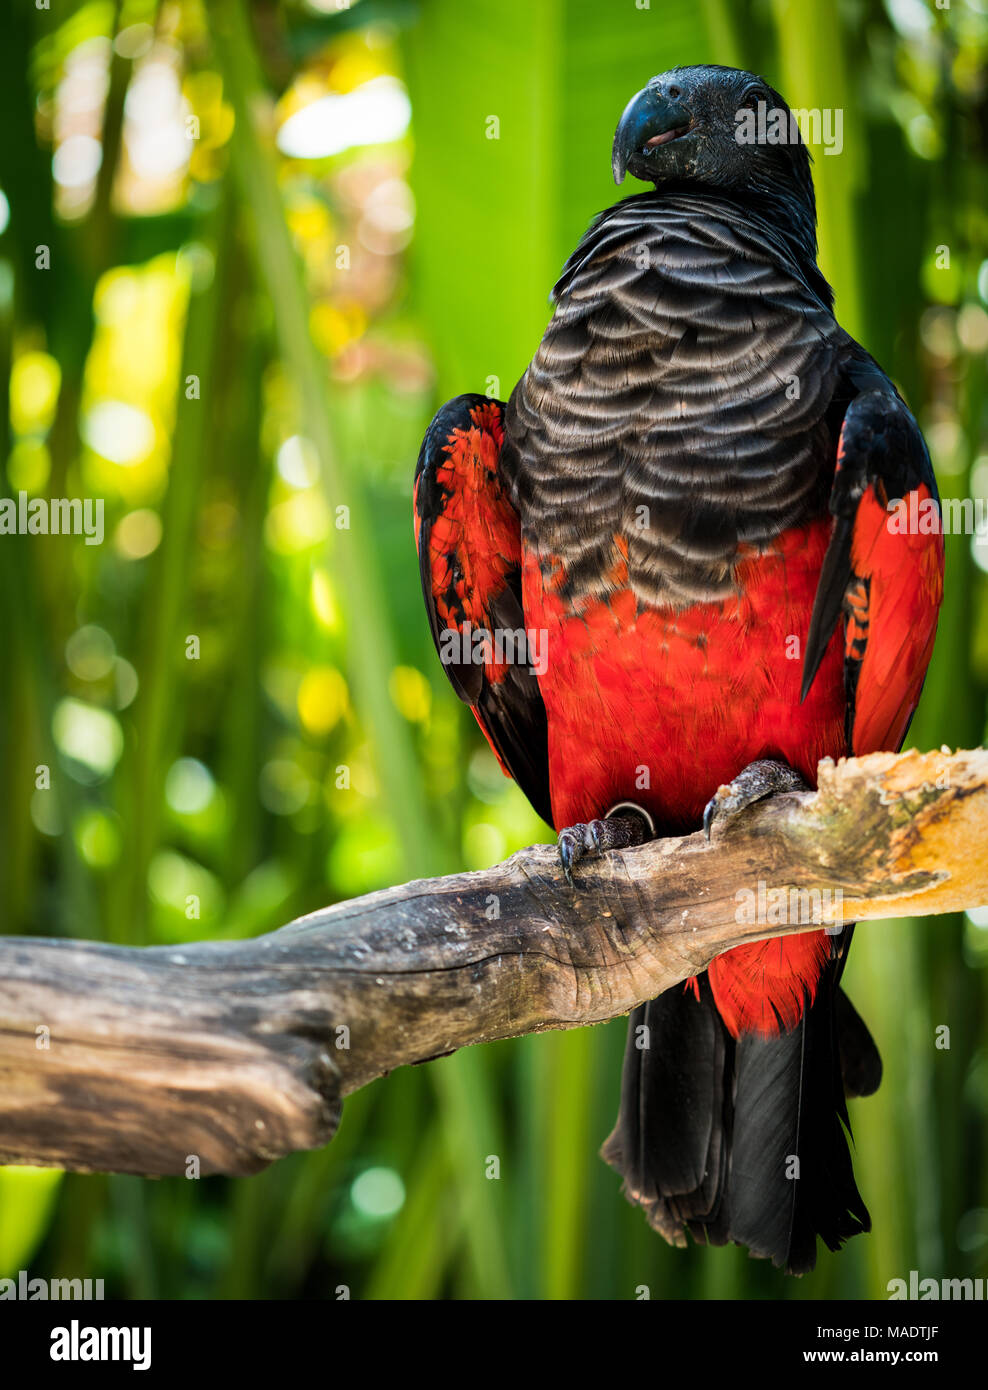 A Pesquet's parrot in Bali Stock Photo